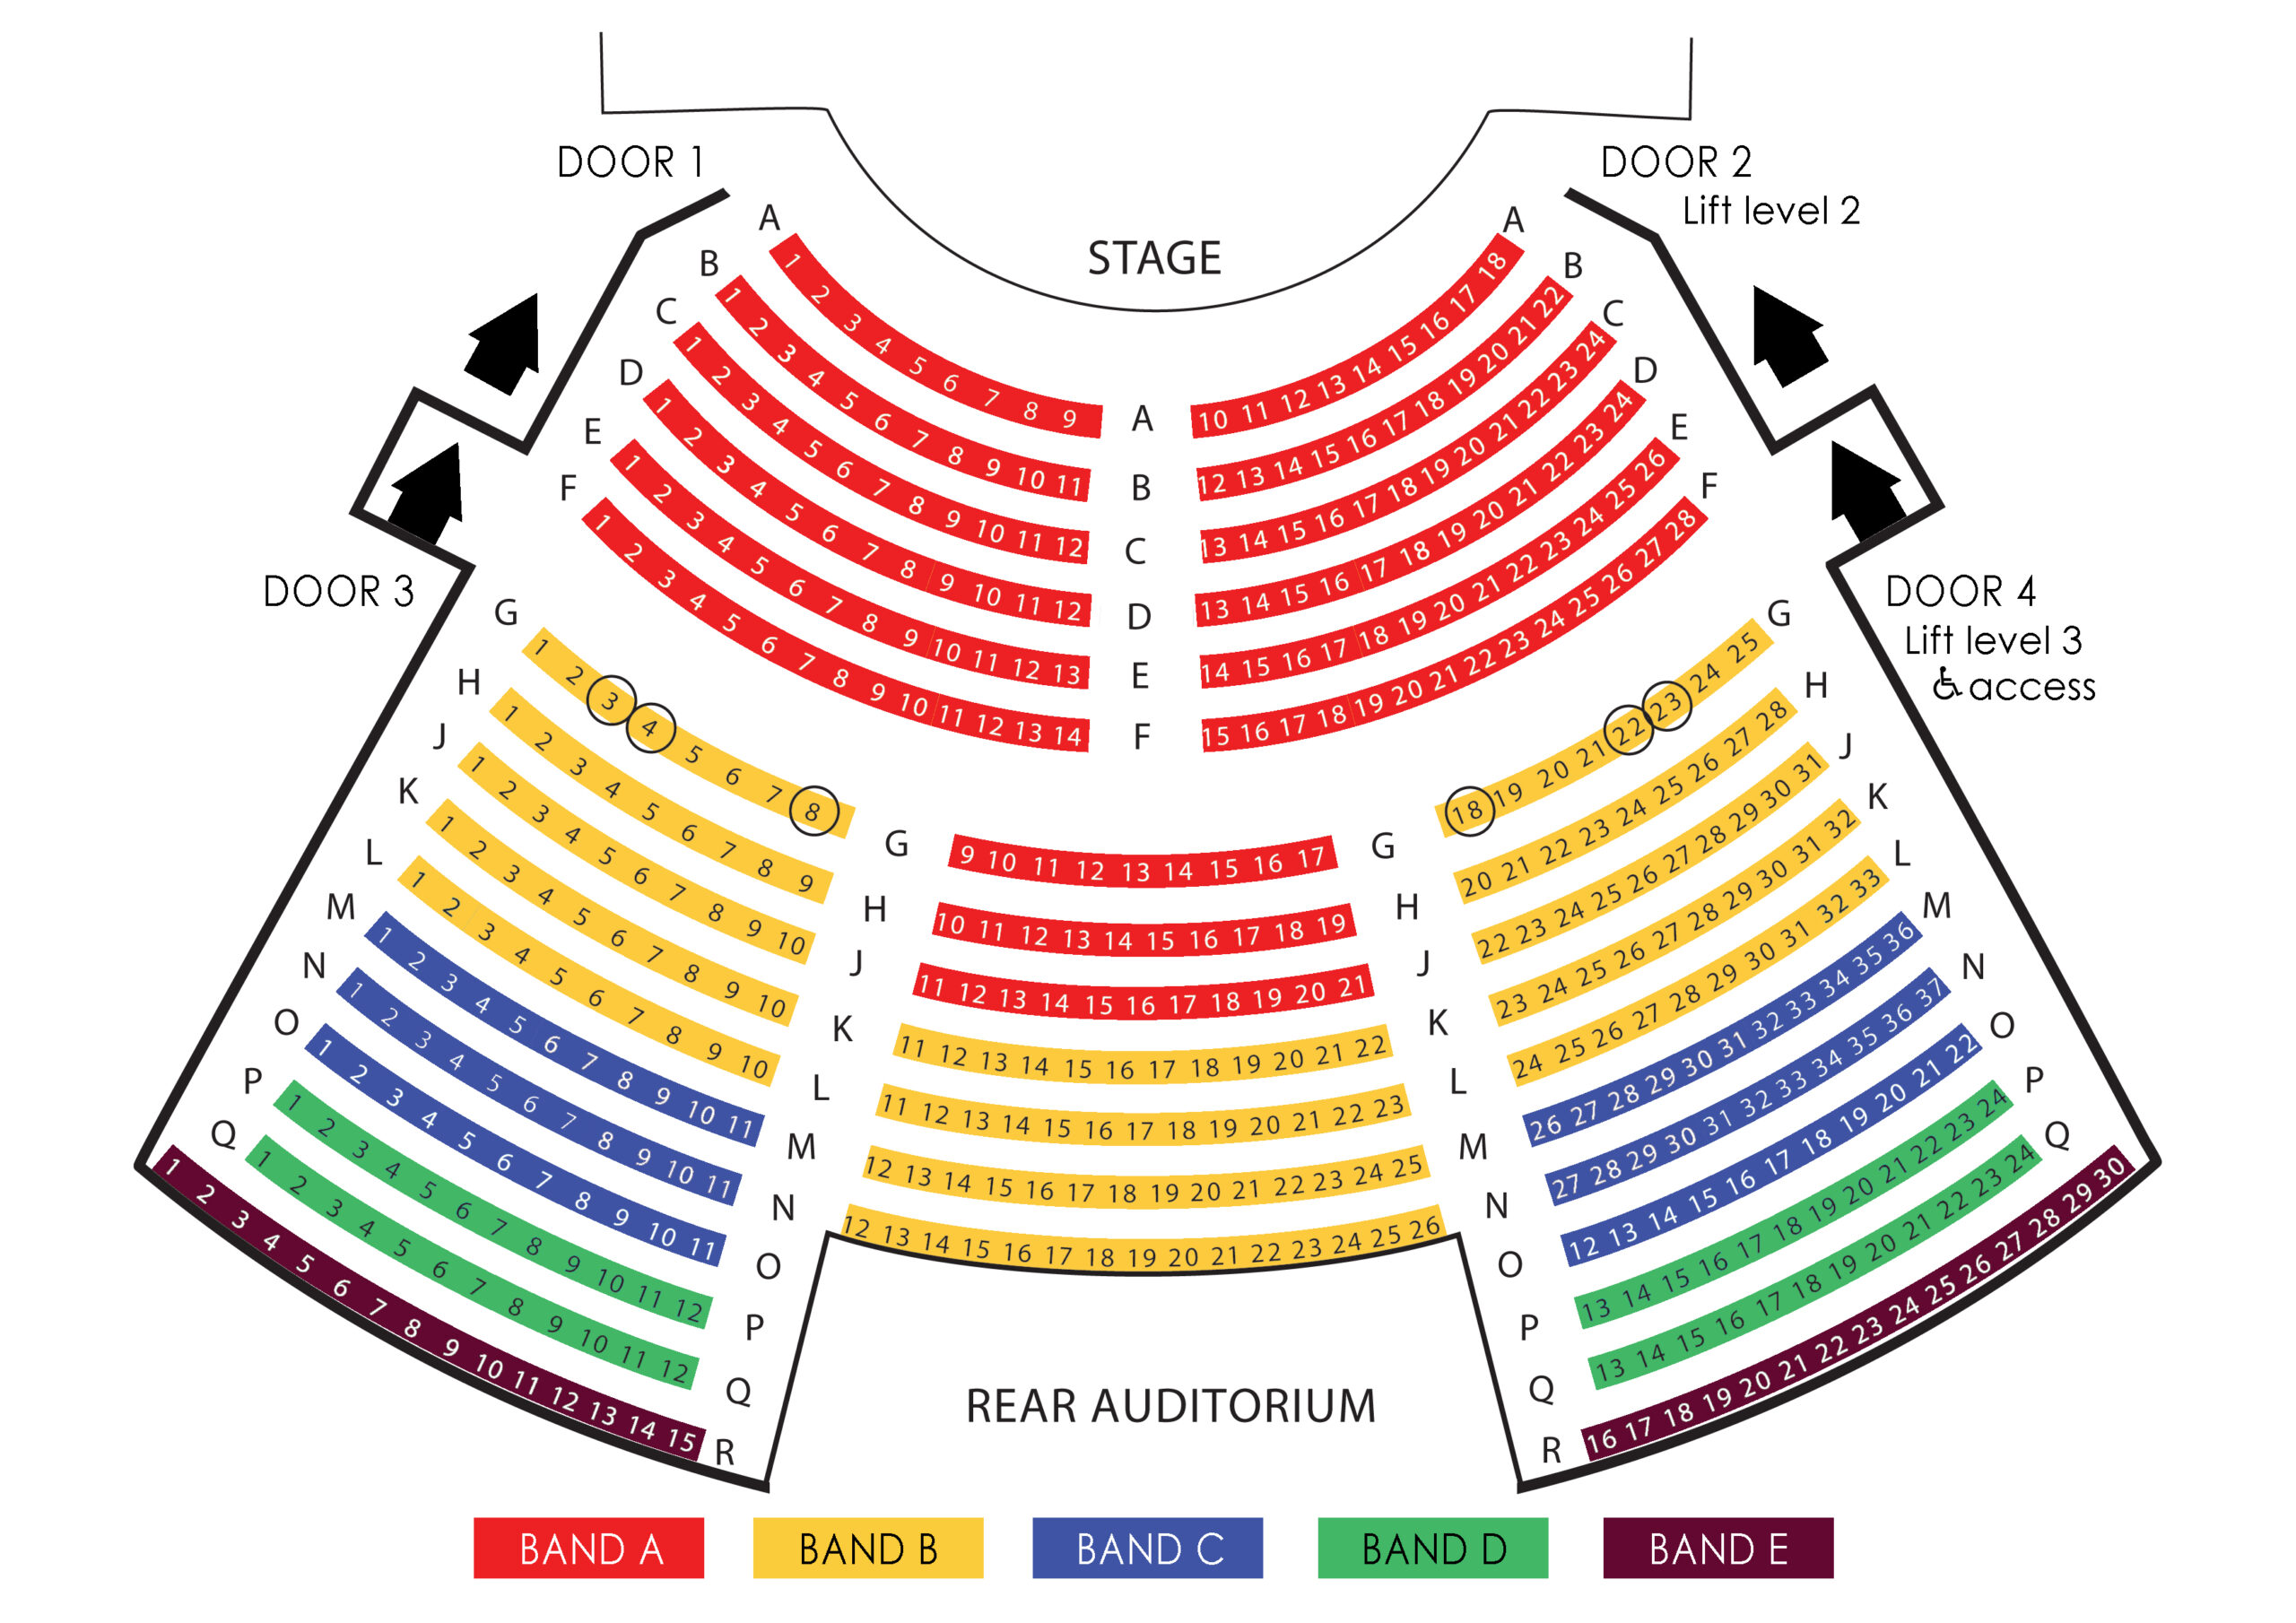 Northcott-Banded-Seating-Plan-2019-scaled.jpg